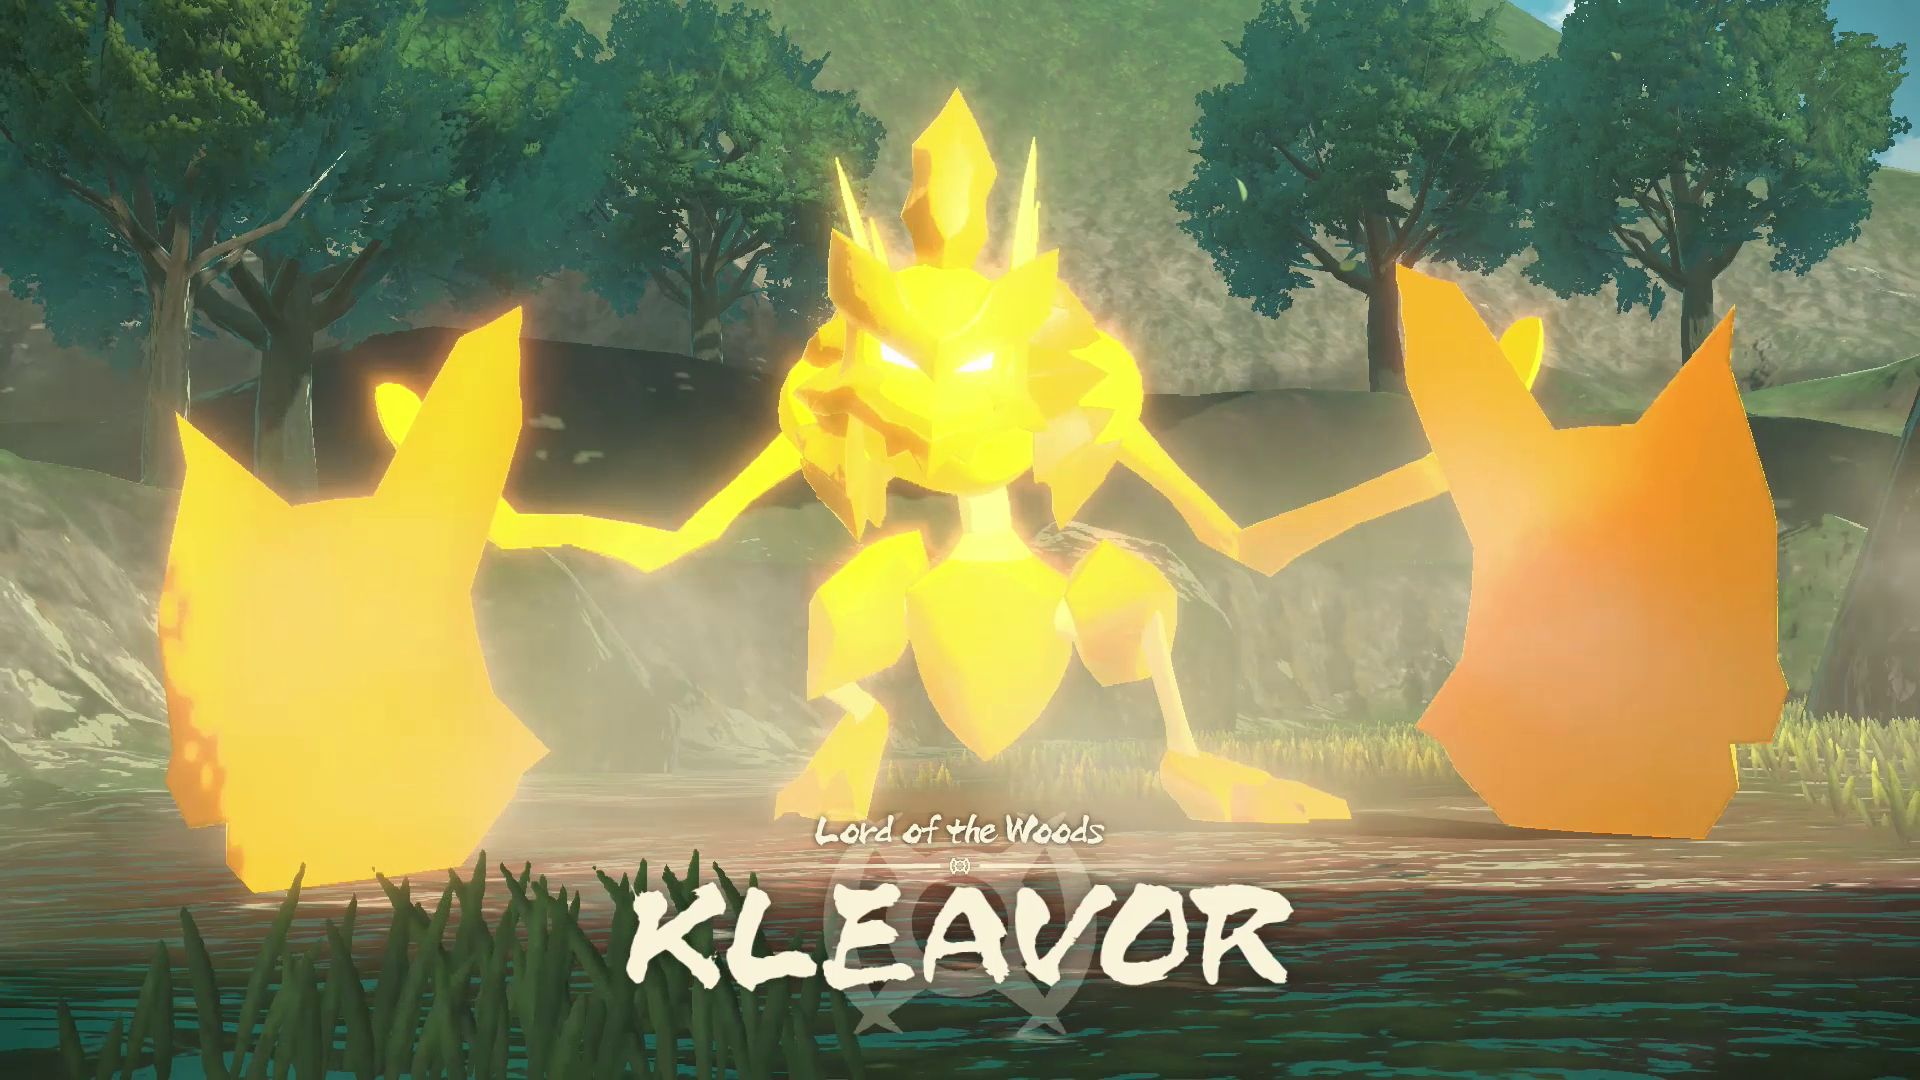 Kleavor, an evolution of Scyther, debuts in Pokémon Legends: Arceus. The formidable Pokémon has large, axe-like hands and has survived many battles with them